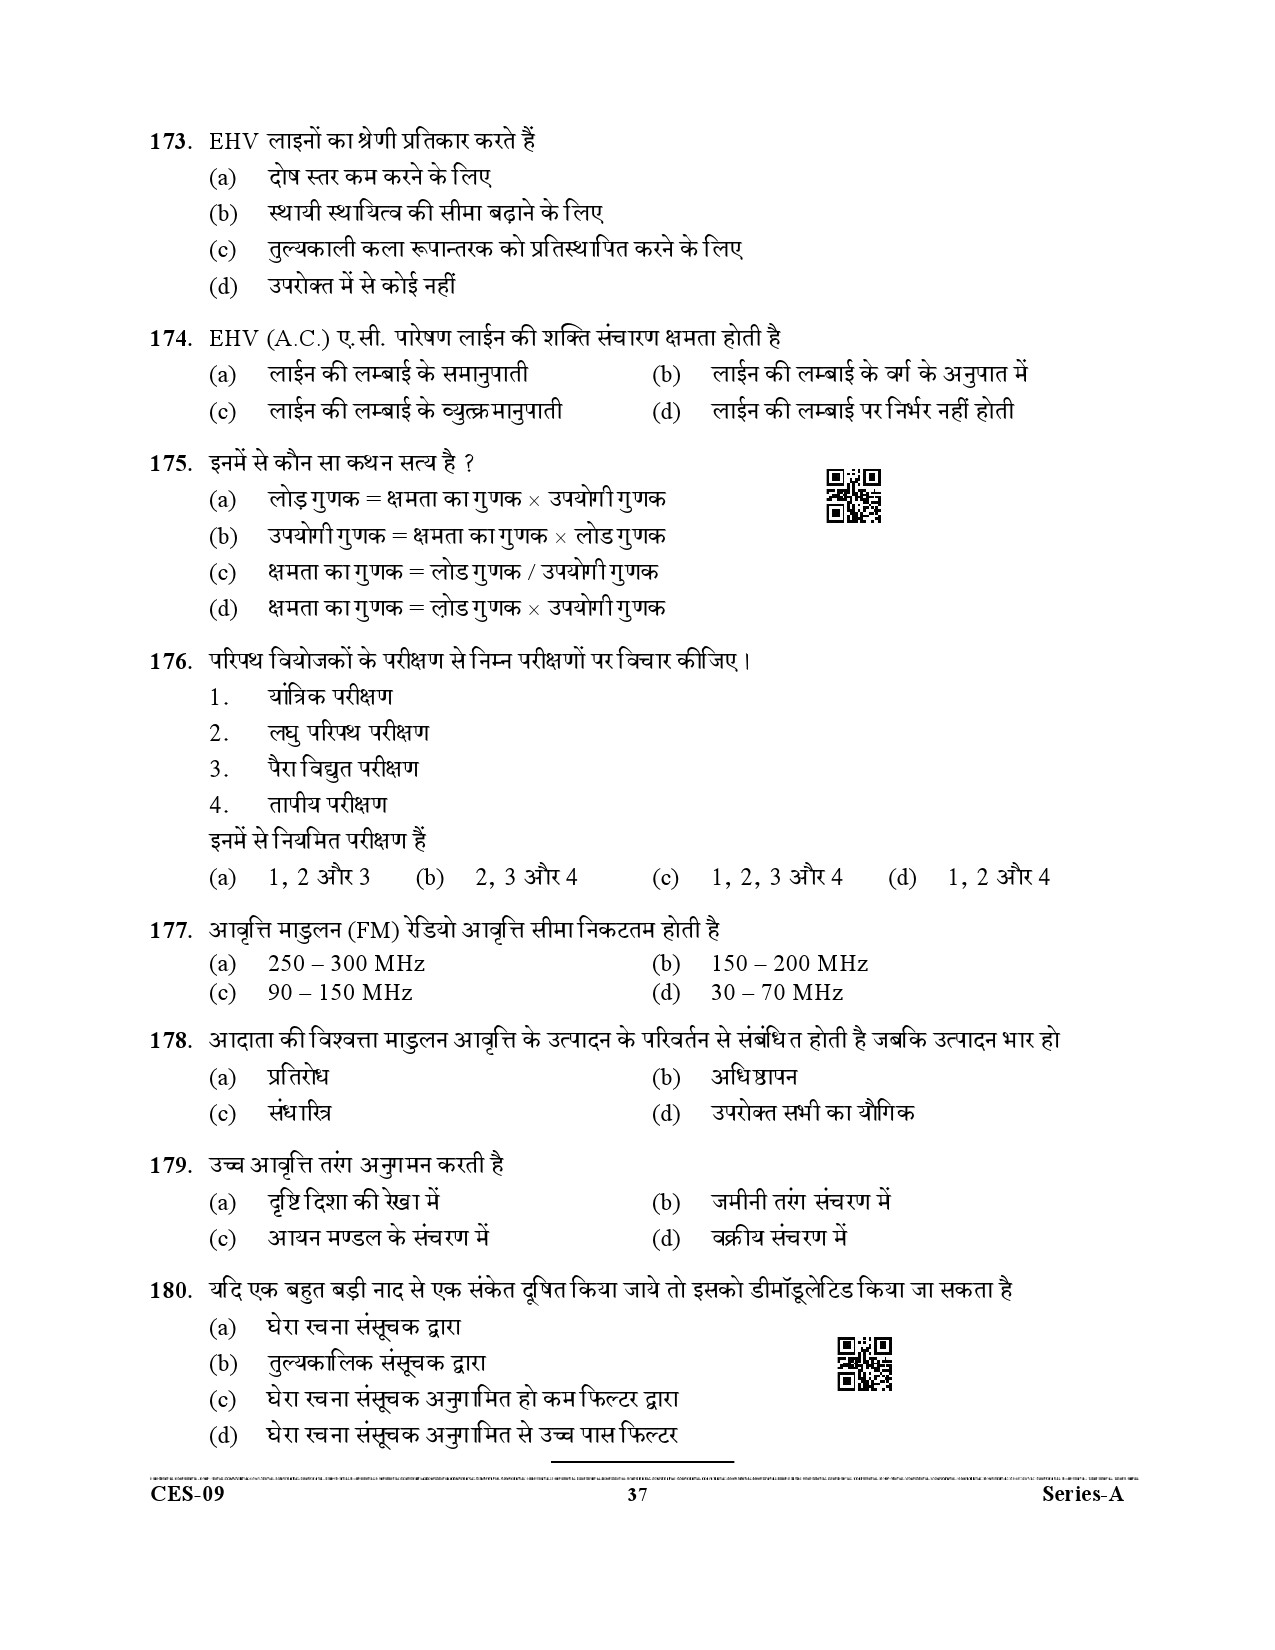 Uttarakhand Combined State Engineering Service Exam 2021 Electrical Engineering Paper II 37